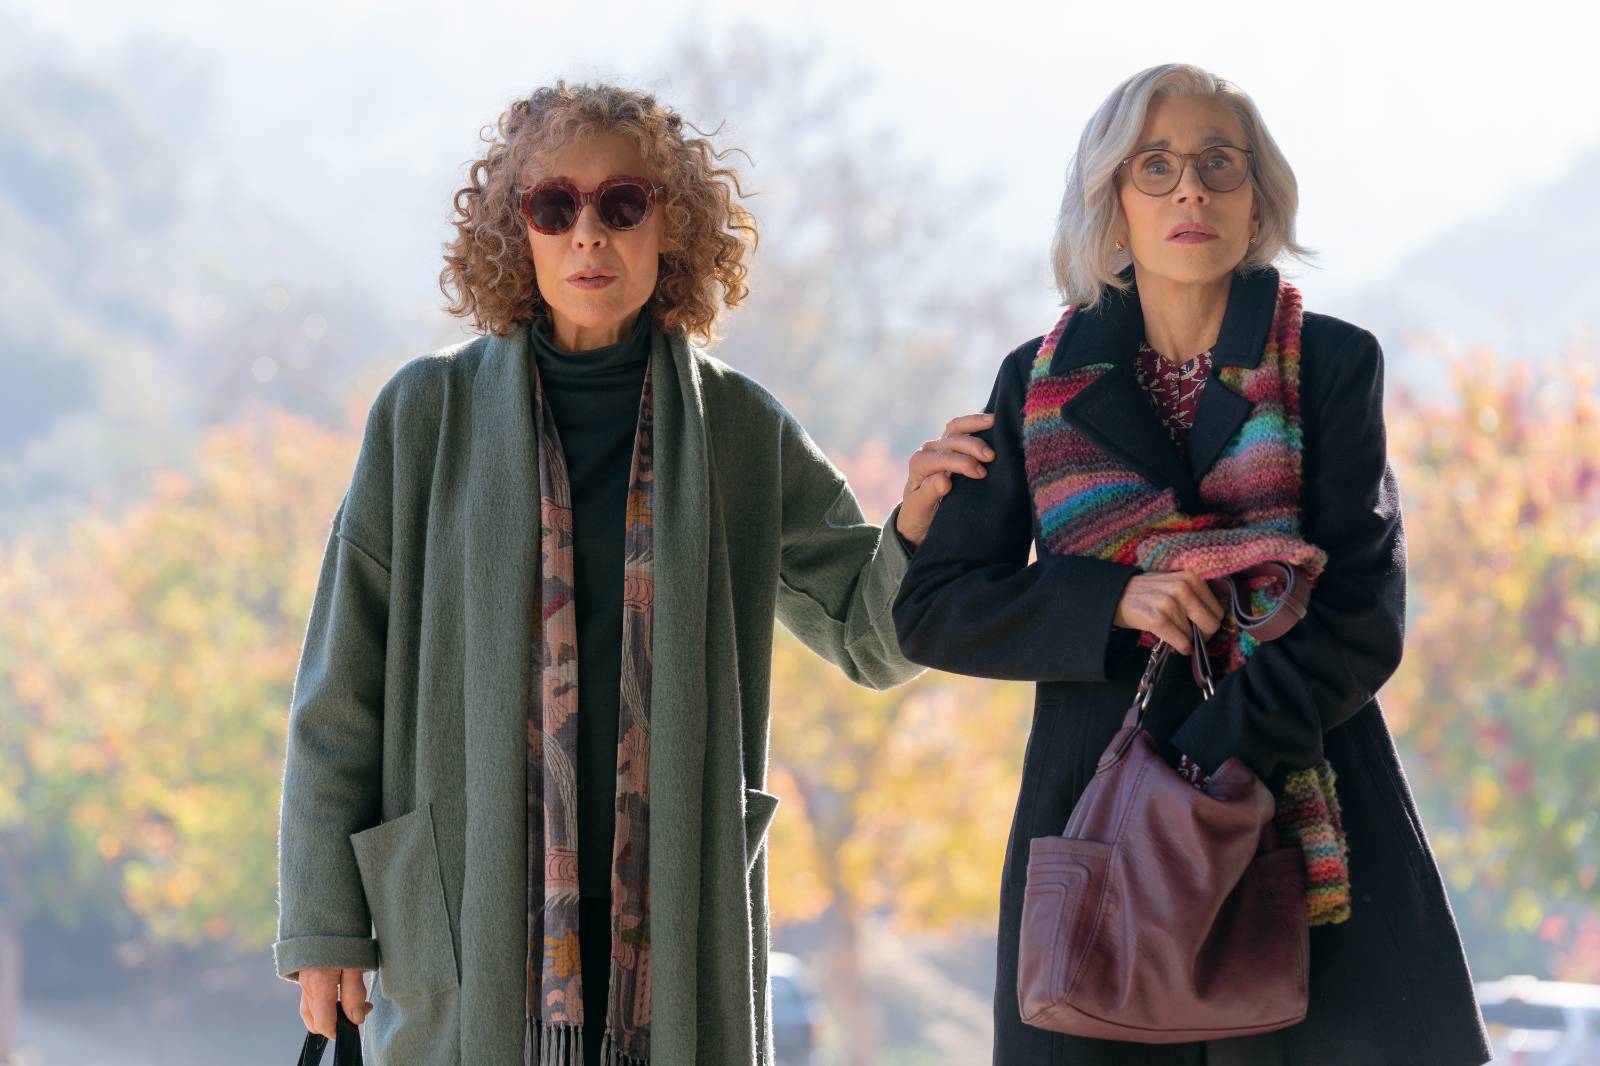 Moving On Review: Jane Fonda and Lily Tomlin Plot a Murder in Haphazard, Affecting Dramedy